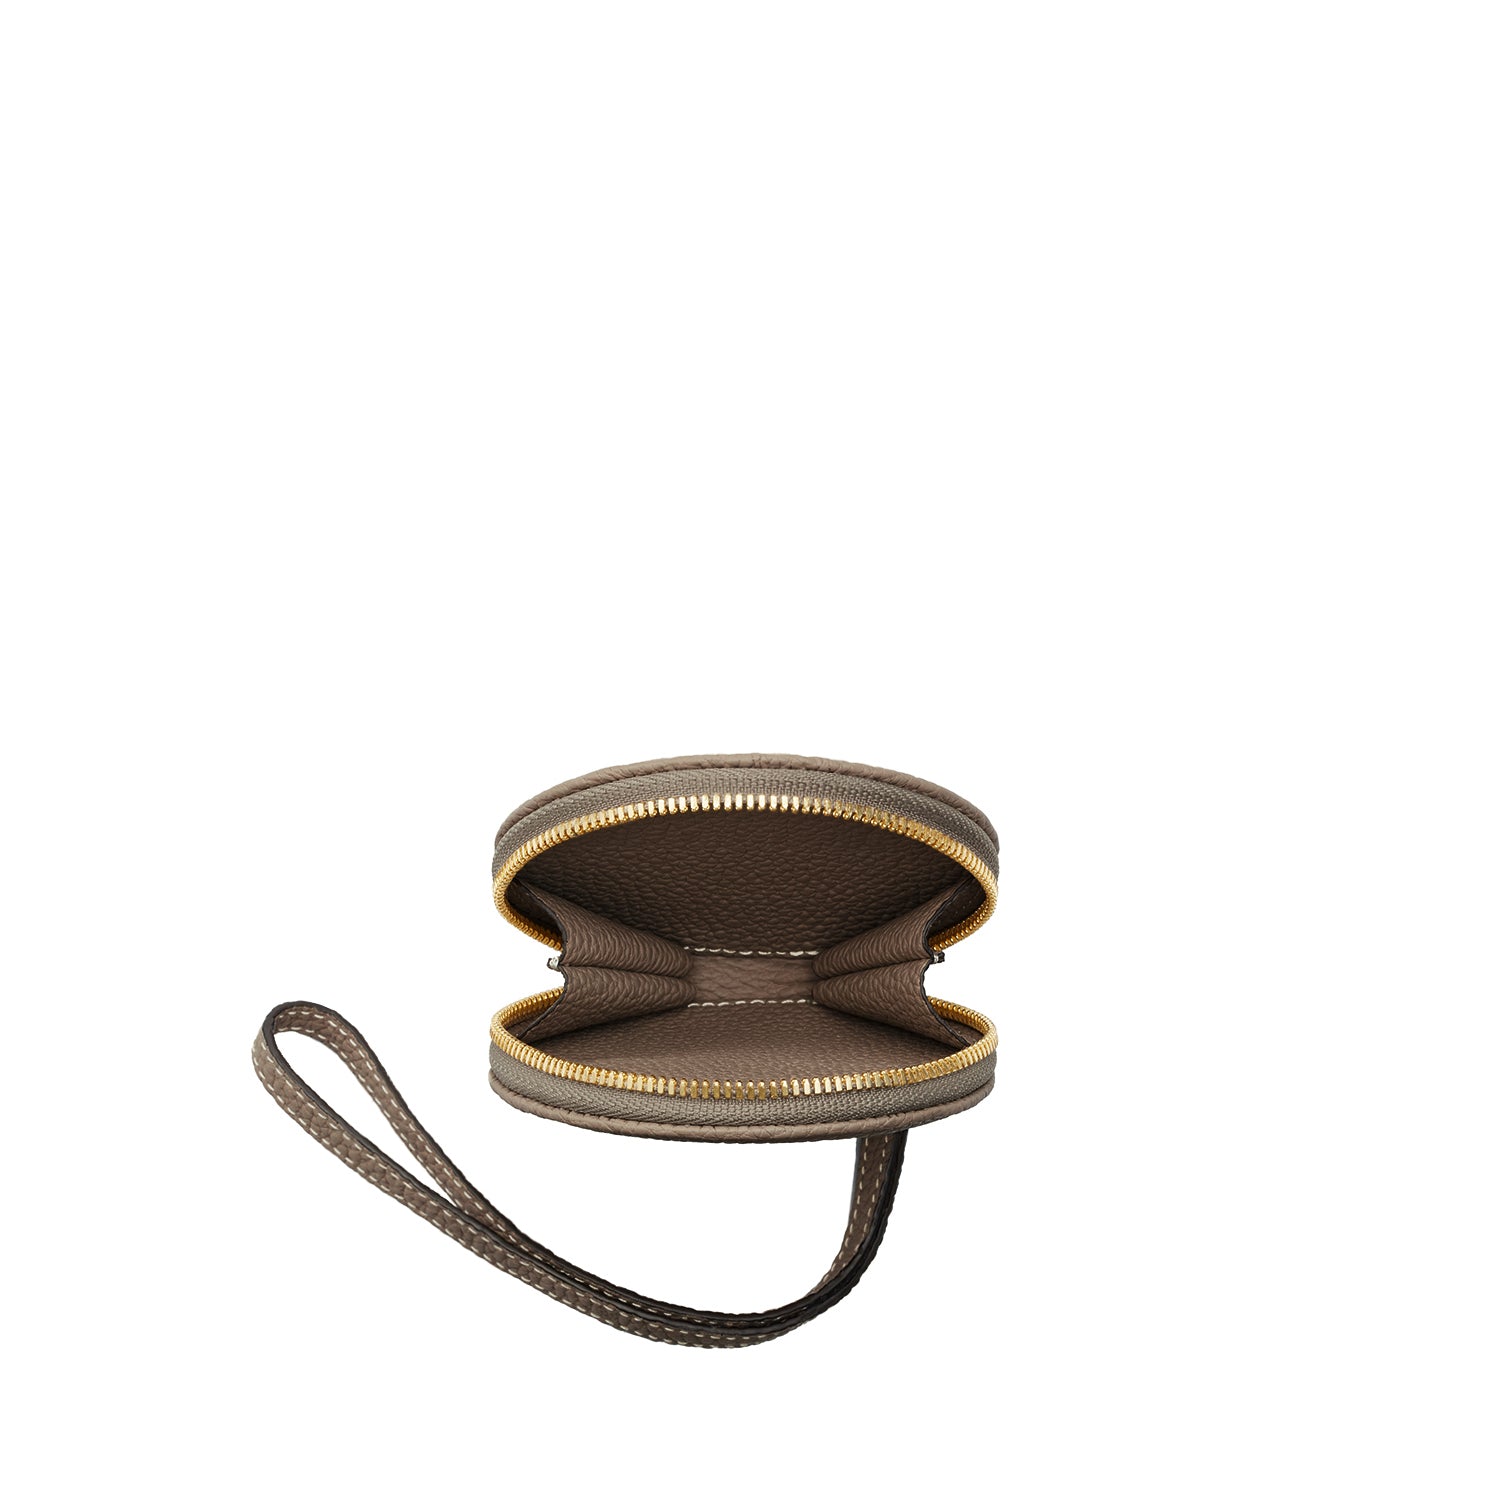 Round gusseted coin case in shrink leather